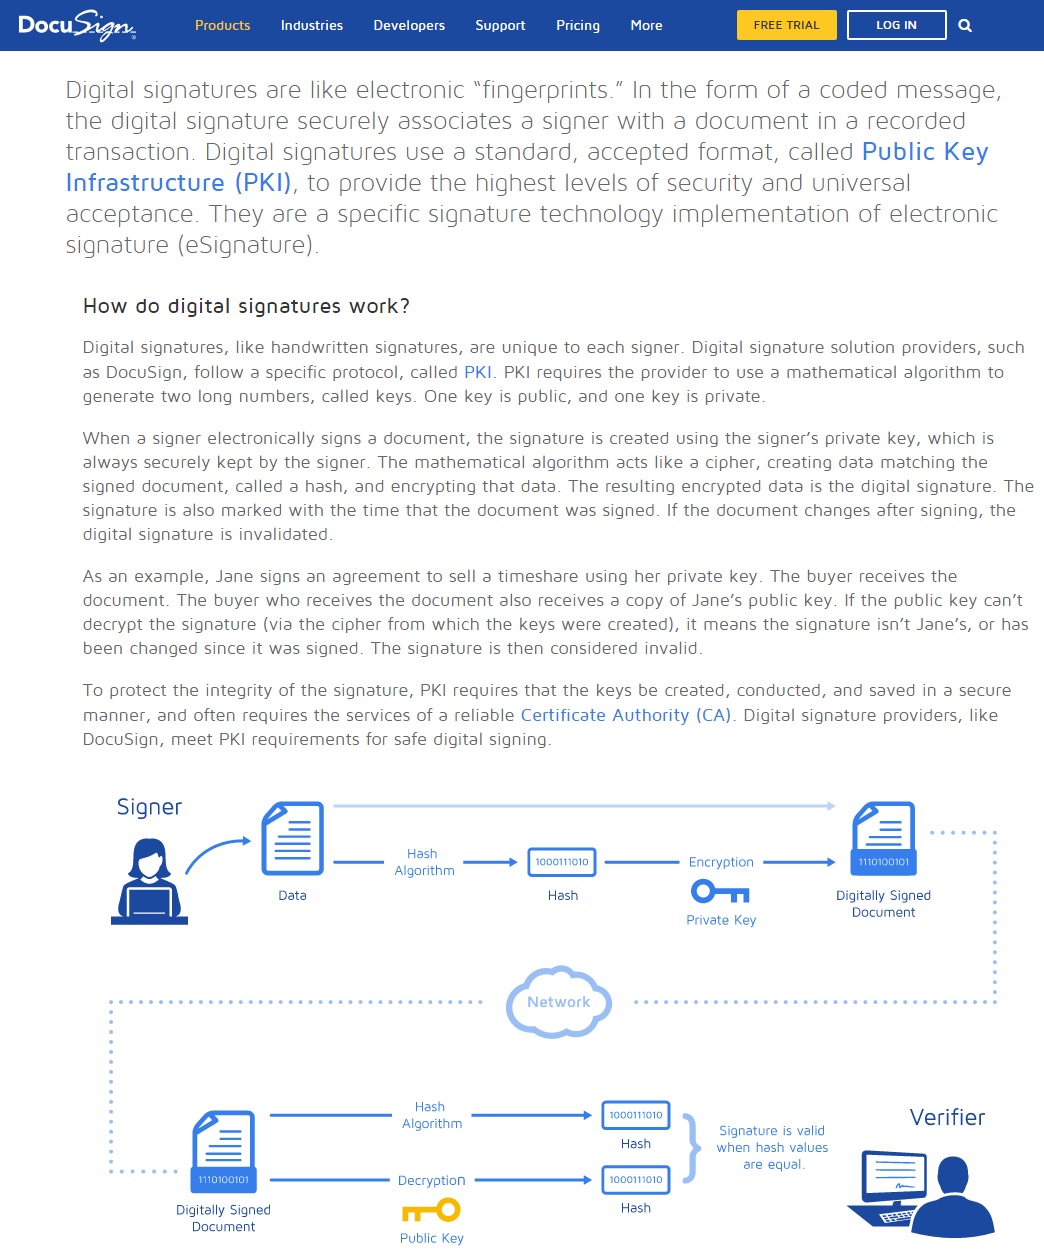 Digital signatures and oher forms of electronic signatures are legally binding in many jurisdictions. This is some material from the website of the electronic signing company DocuSign